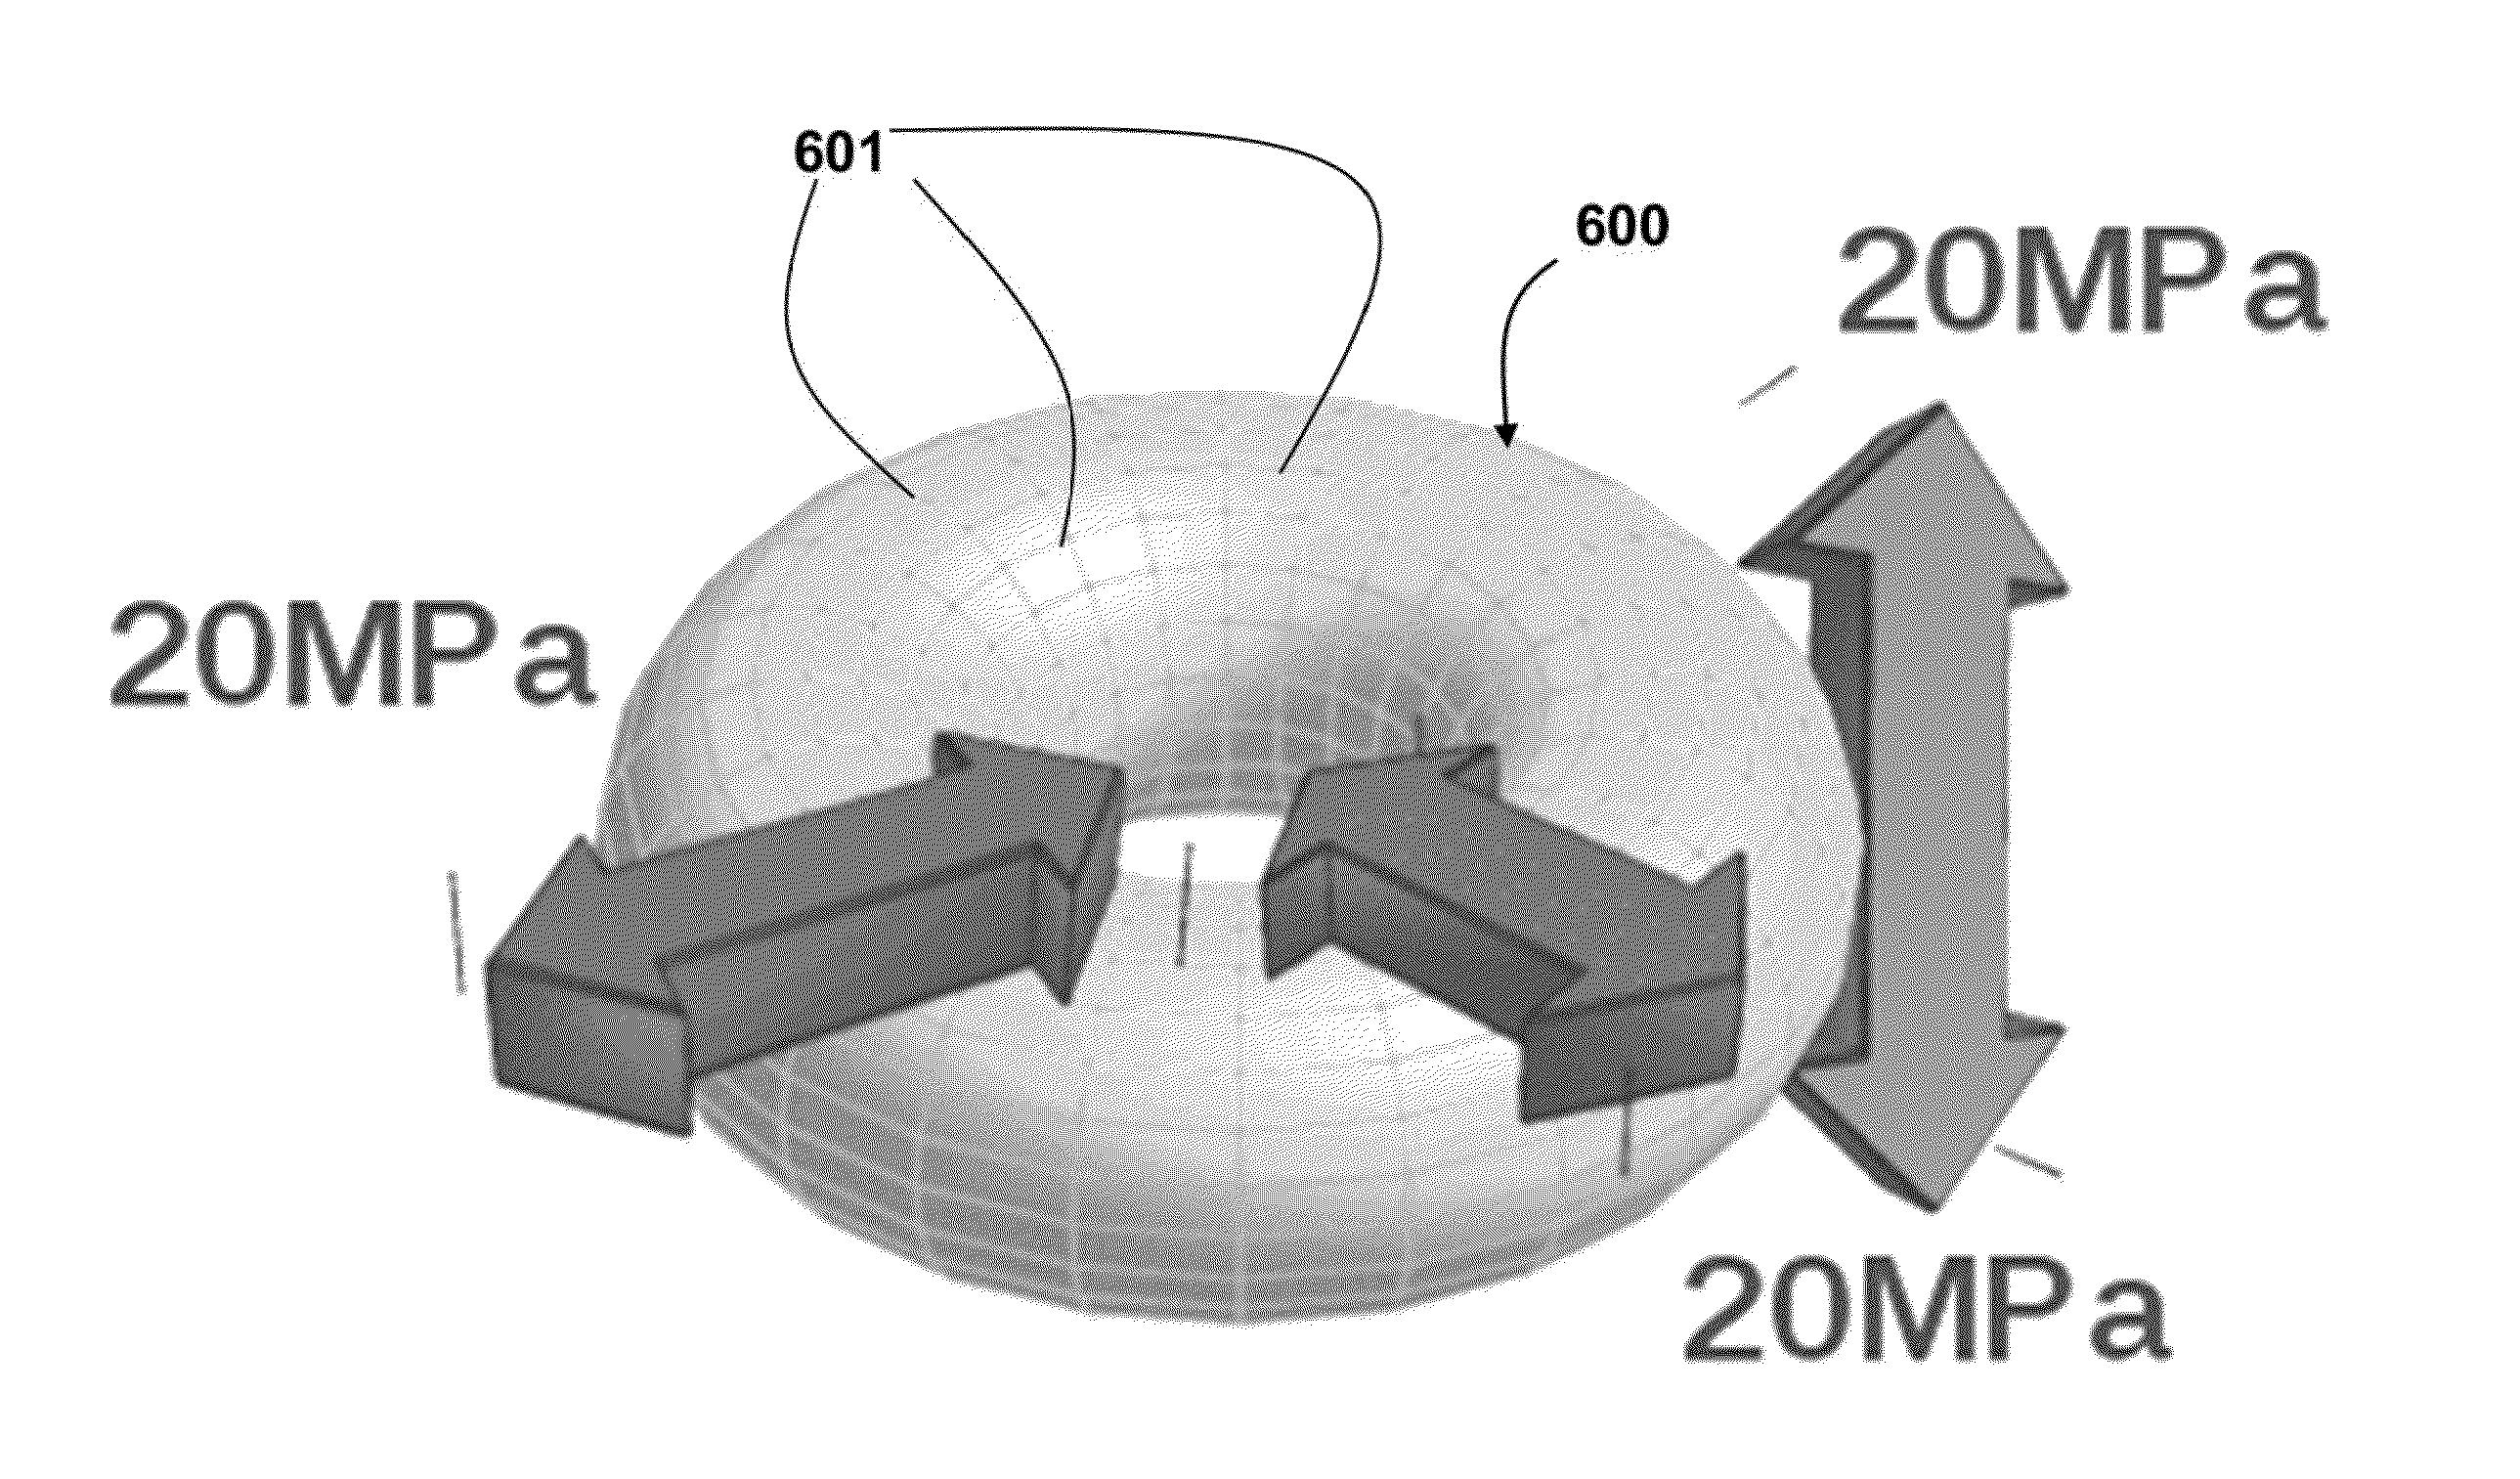 Method and Apparatus for Printing 3D Objects Using Additive Manufacturing and Material Extruder with Translational and Rotational Axes